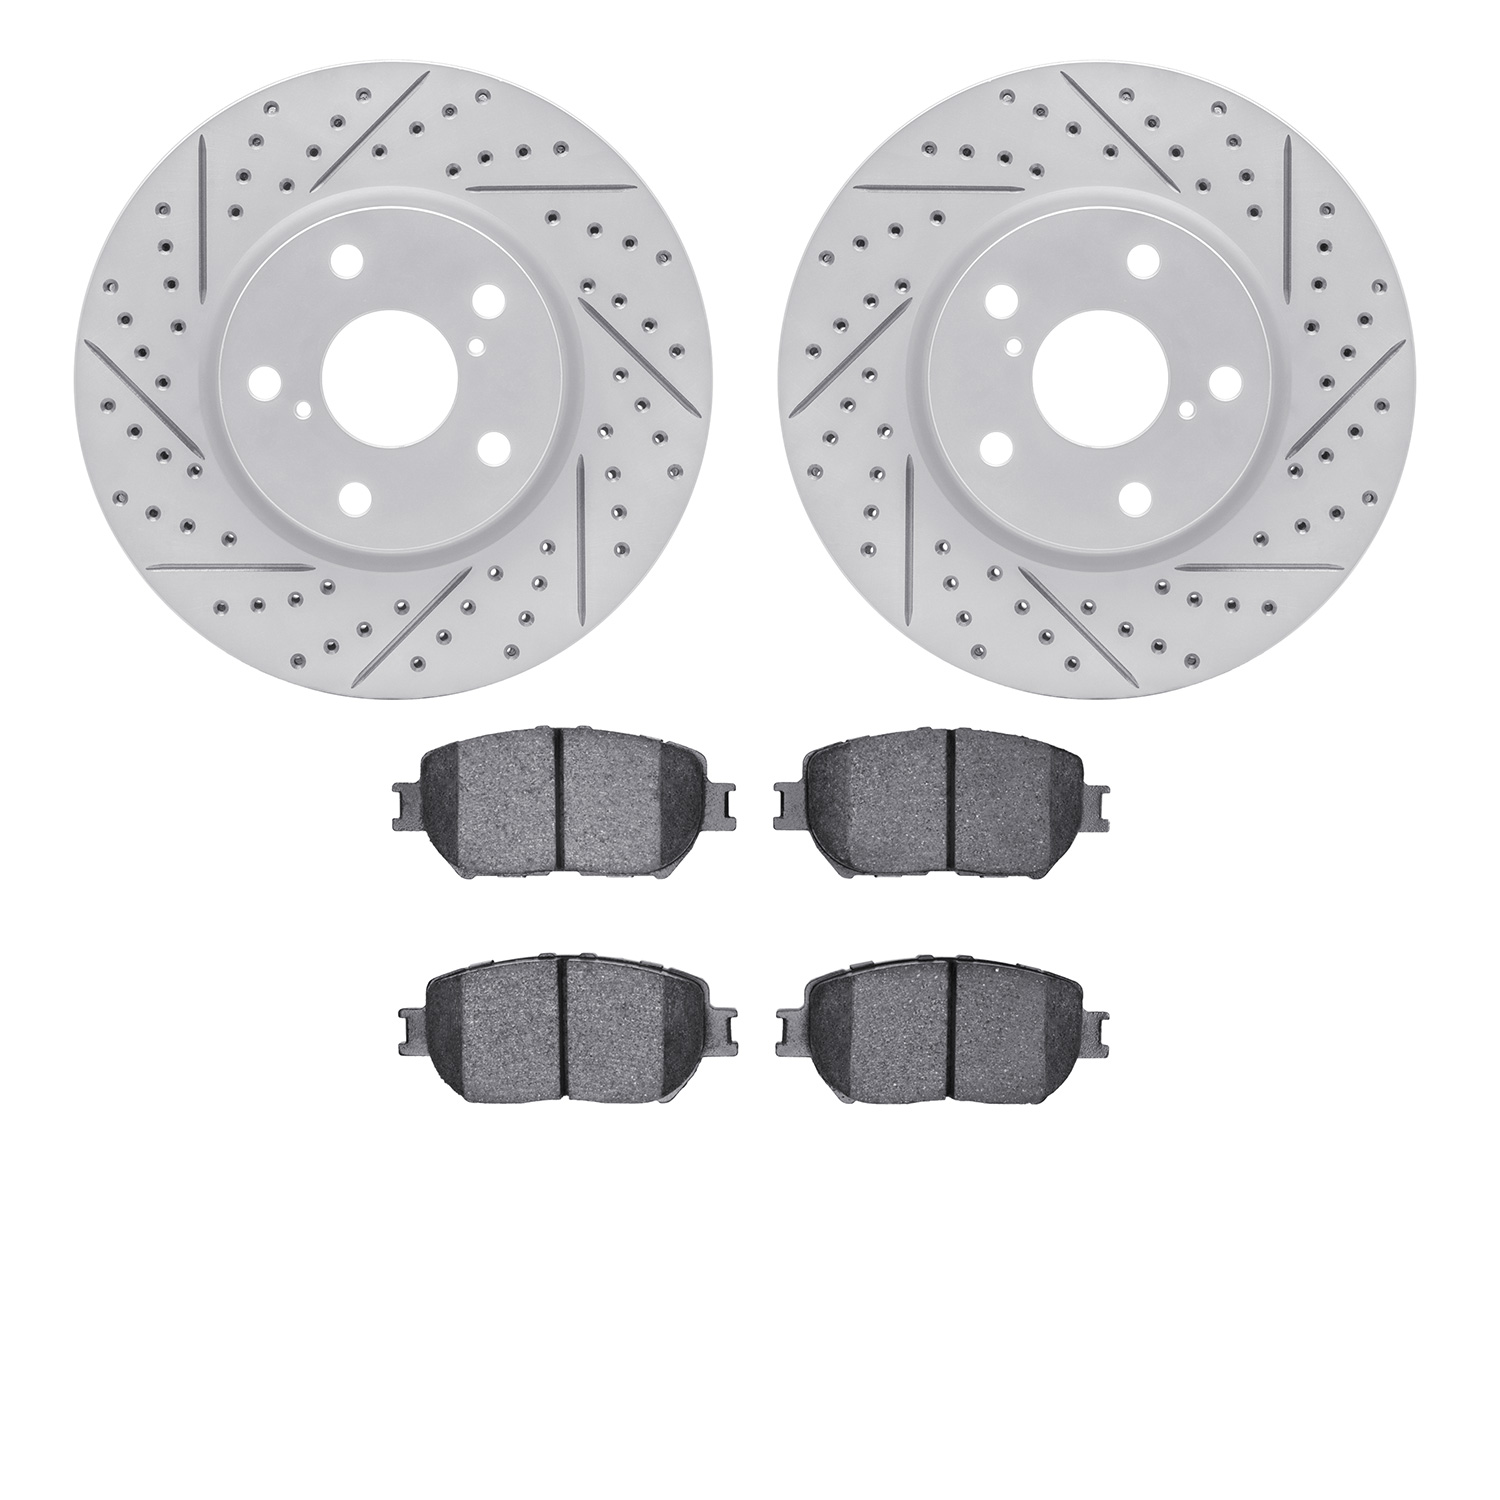 2502-75010 Geoperformance Drilled/Slotted Rotors w/5000 Advanced Brake Pads Kit, 2006-2015 Lexus/Toyota/Scion, Position: Front